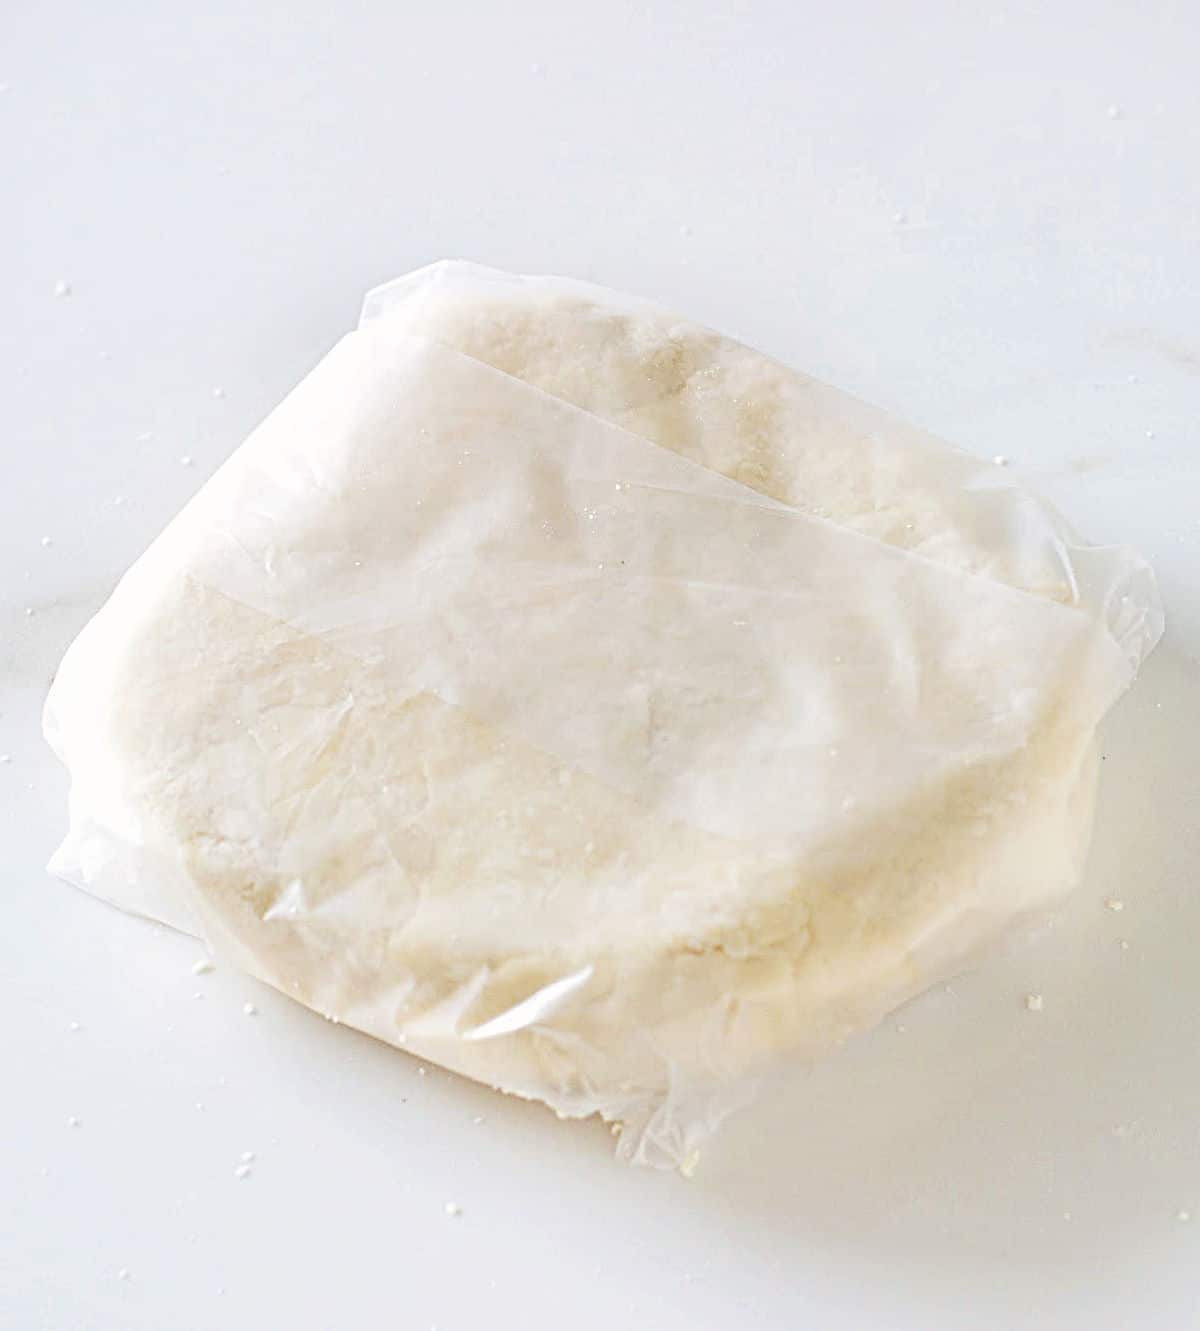 Wrapped disc of pie crust on a white marble surface.